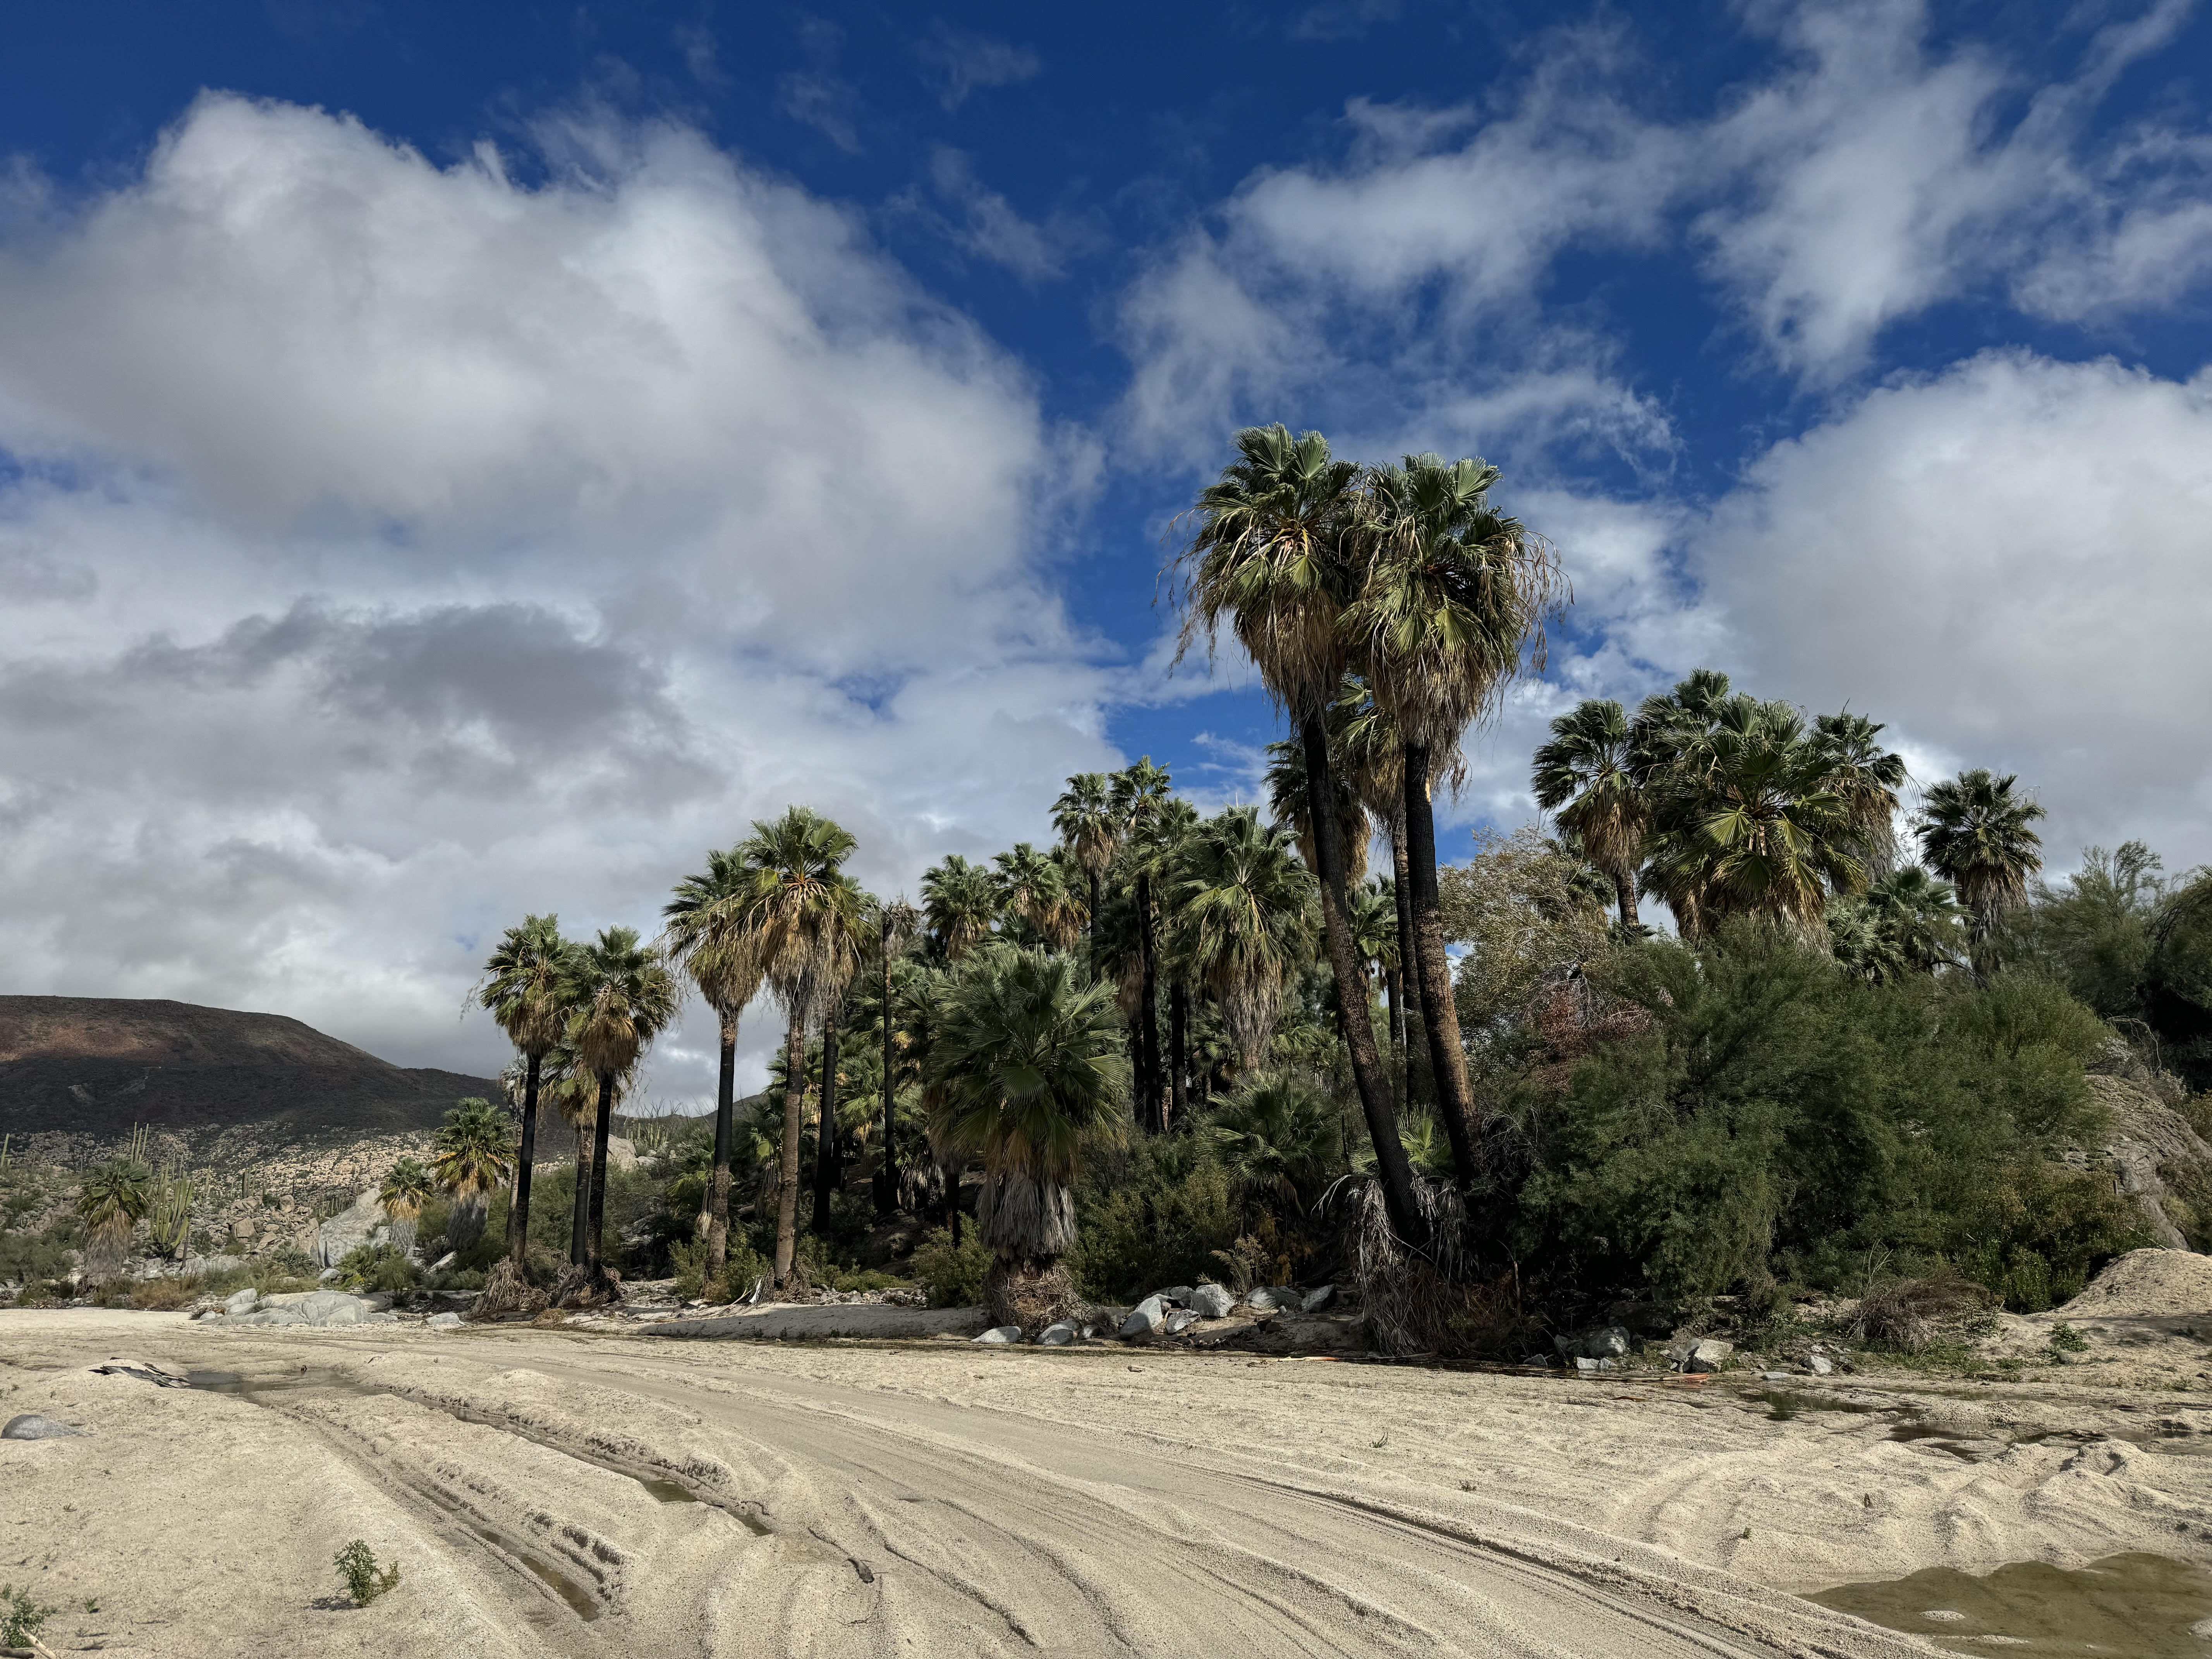 A desert oasis landscape with tall palm trees clustered along a sandy track, under a dramatic sky filled with fluffy white clouds, with a backdrop of arid mountainous terrain